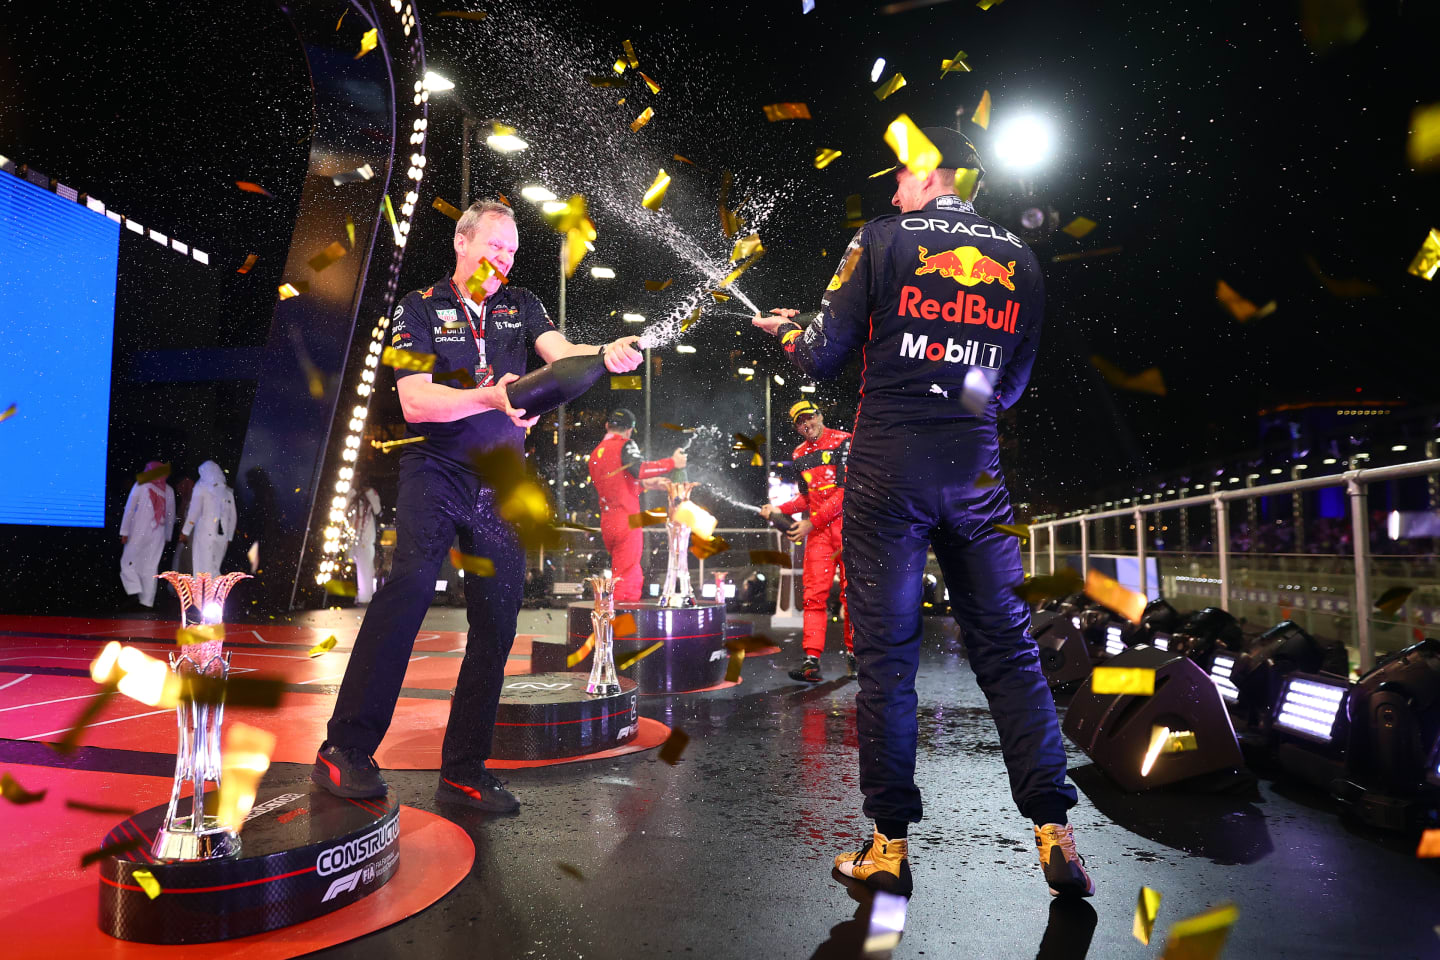 JEDDAH, SAUDI ARABIA - MARCH 27: Race winner Max Verstappen of the Netherlands and Oracle Red Bull Racing and Red Bull Racing Head of Car Engineering Paul Monaghan celebrate on the podium during the F1 Grand Prix of Saudi Arabia at the Jeddah Corniche Circuit on March 27, 2022 in Jeddah, Saudi Arabia. (Photo by Dan Istitene - Formula 1/Formula 1 via Getty Images)